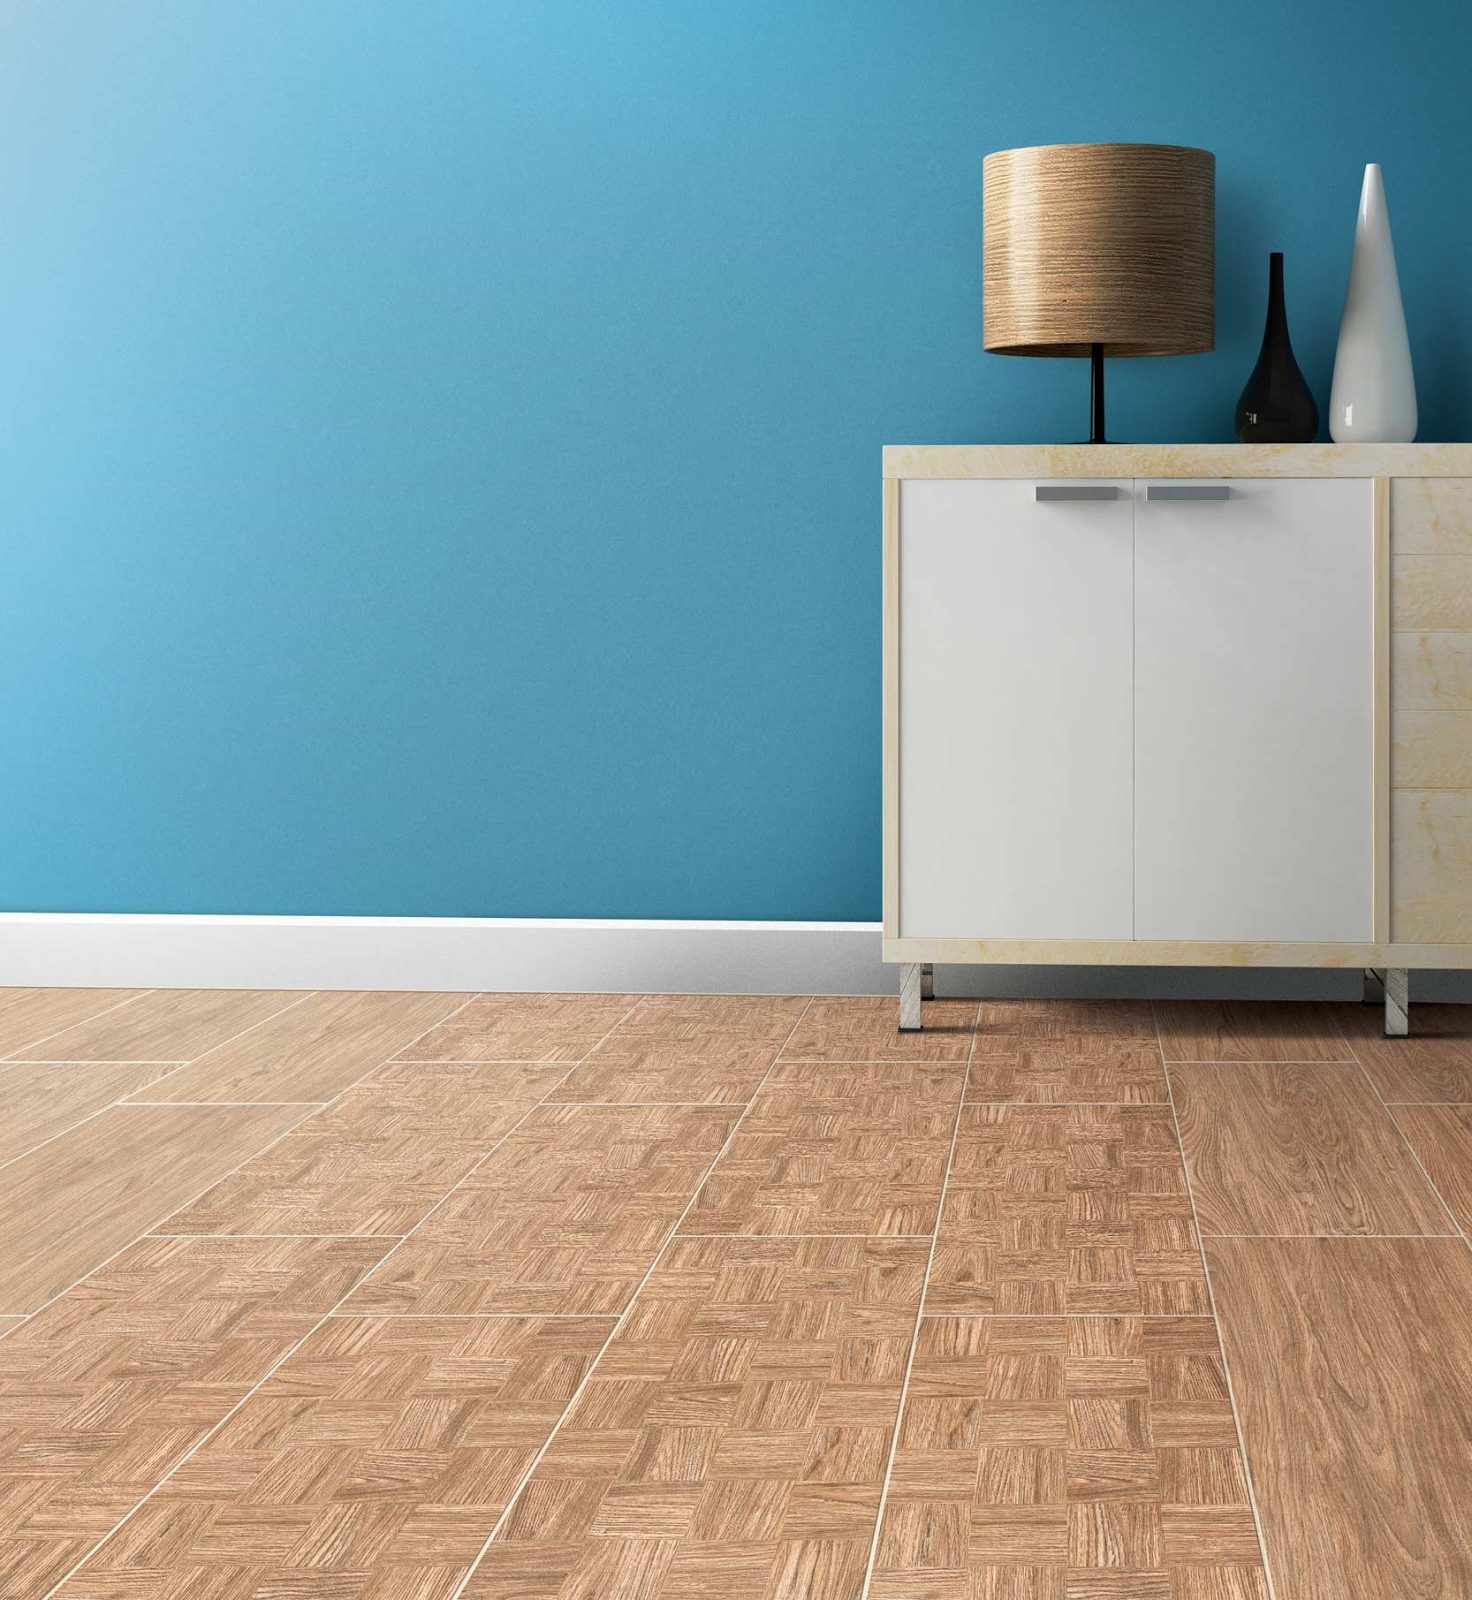 Tiles that resemble wooden flooring. Source: Guocera